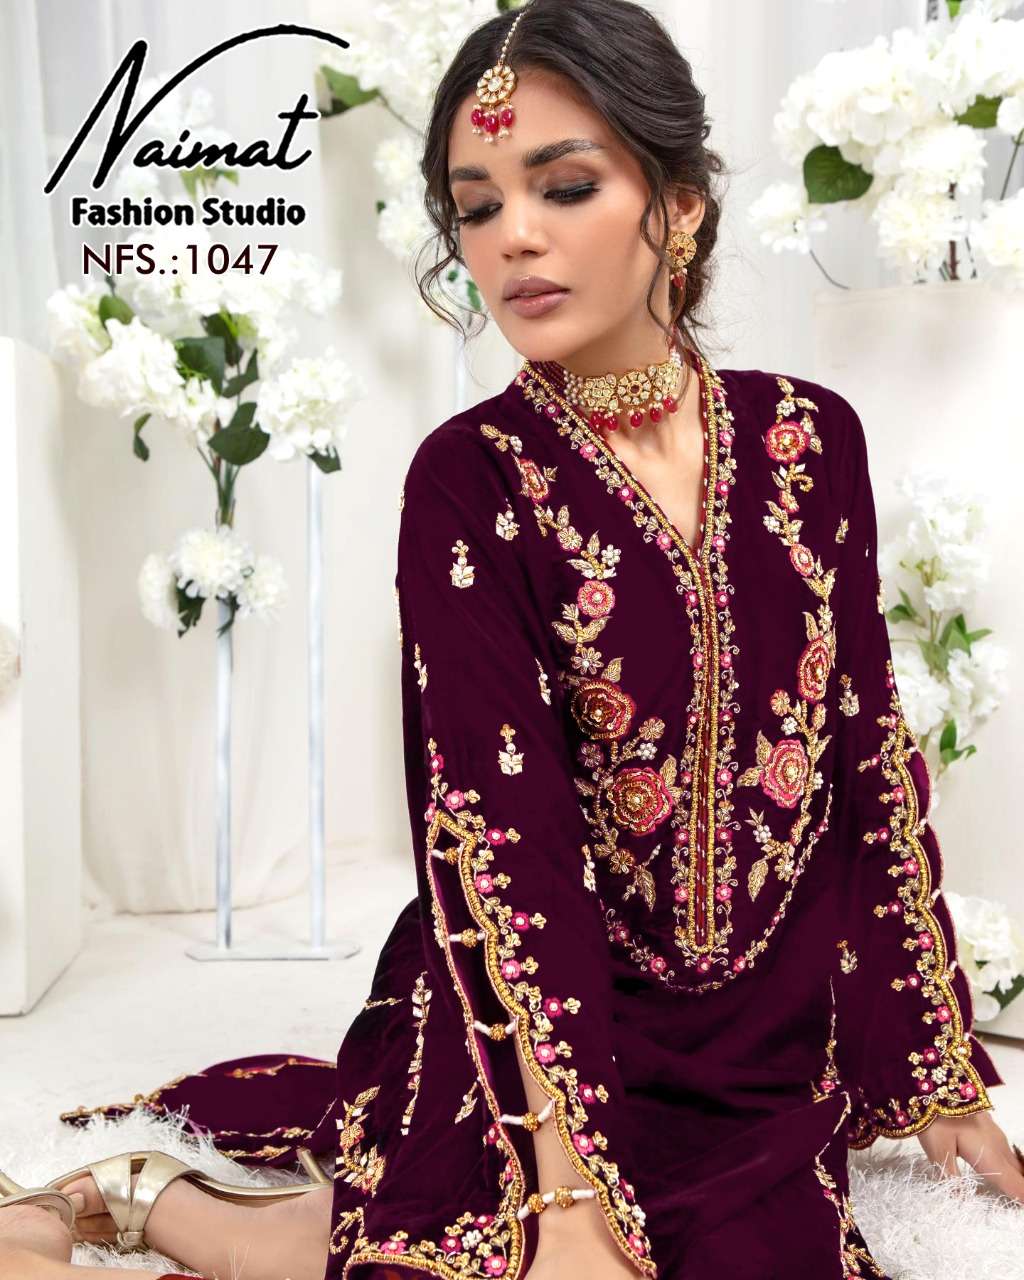 naimat fashion nfs-1047 designer pure blooming georgette suit 